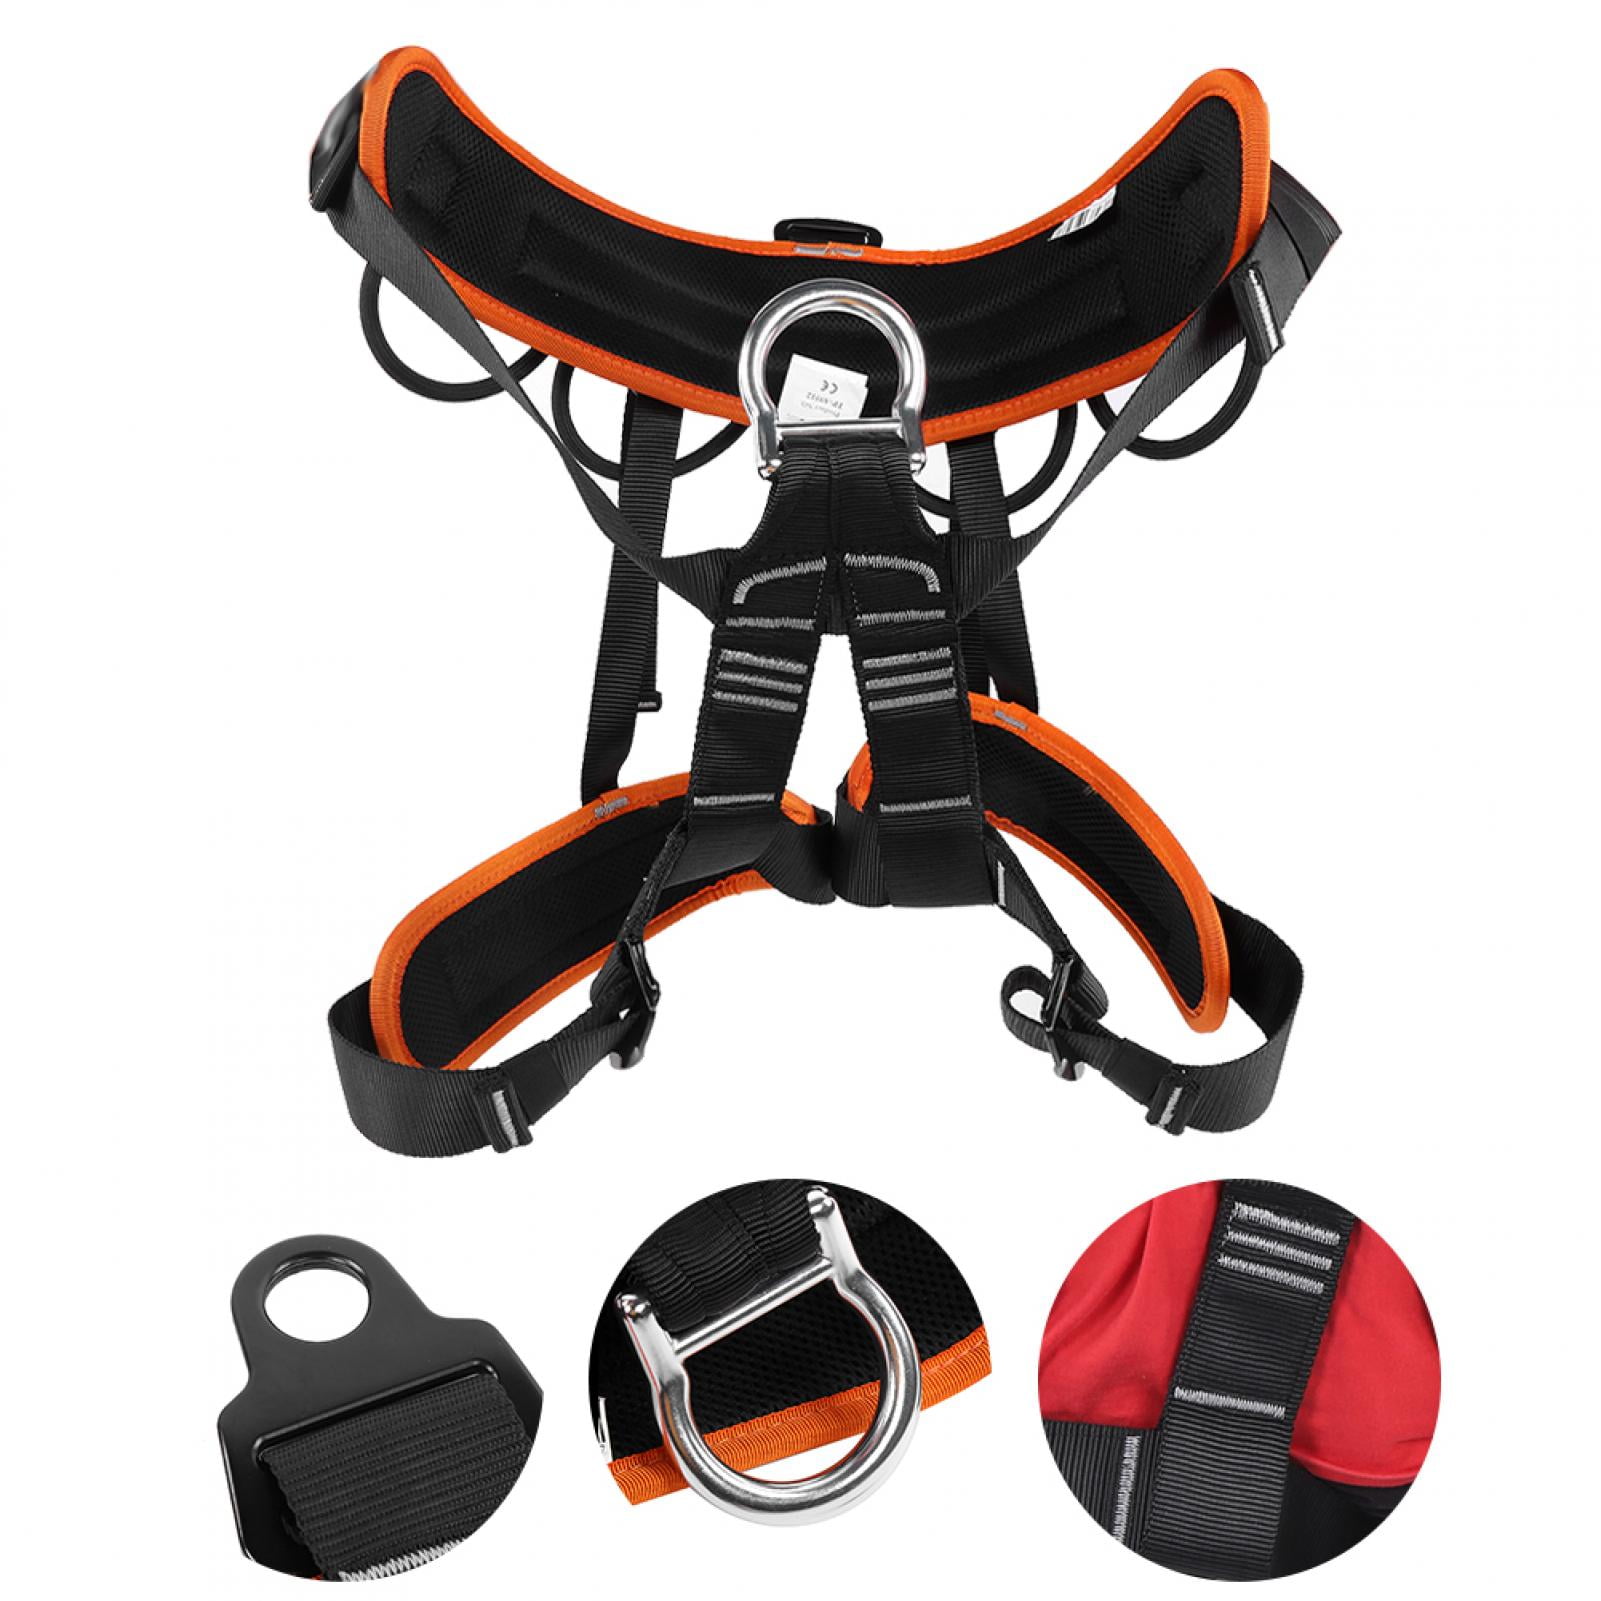 Details about   Harness Seat Belts Safety Rock Climbing Height Rappelling Equipment UK